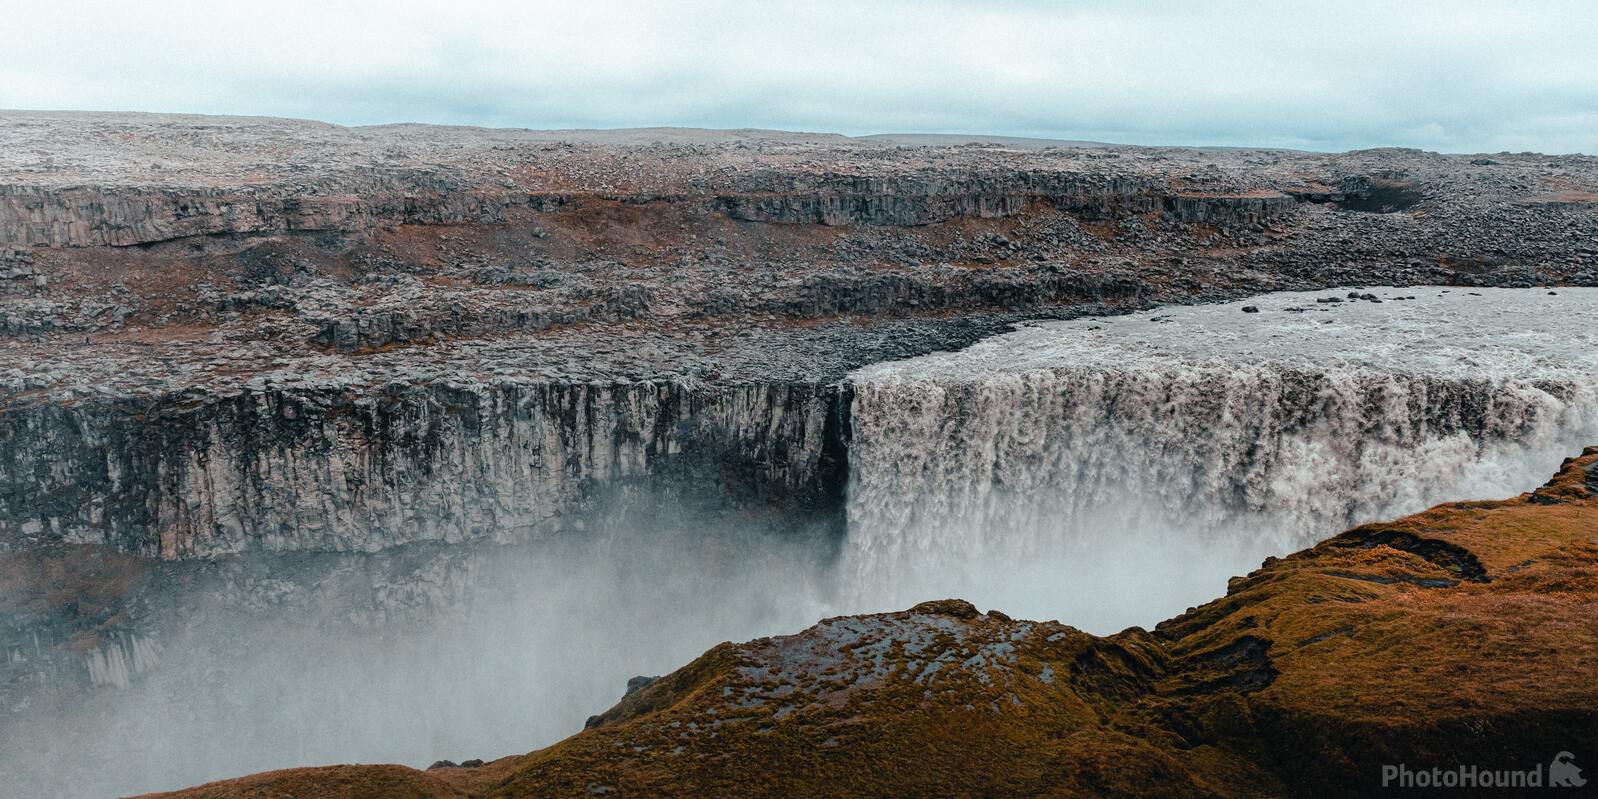 Image of Dettifoss by Team PhotoHound